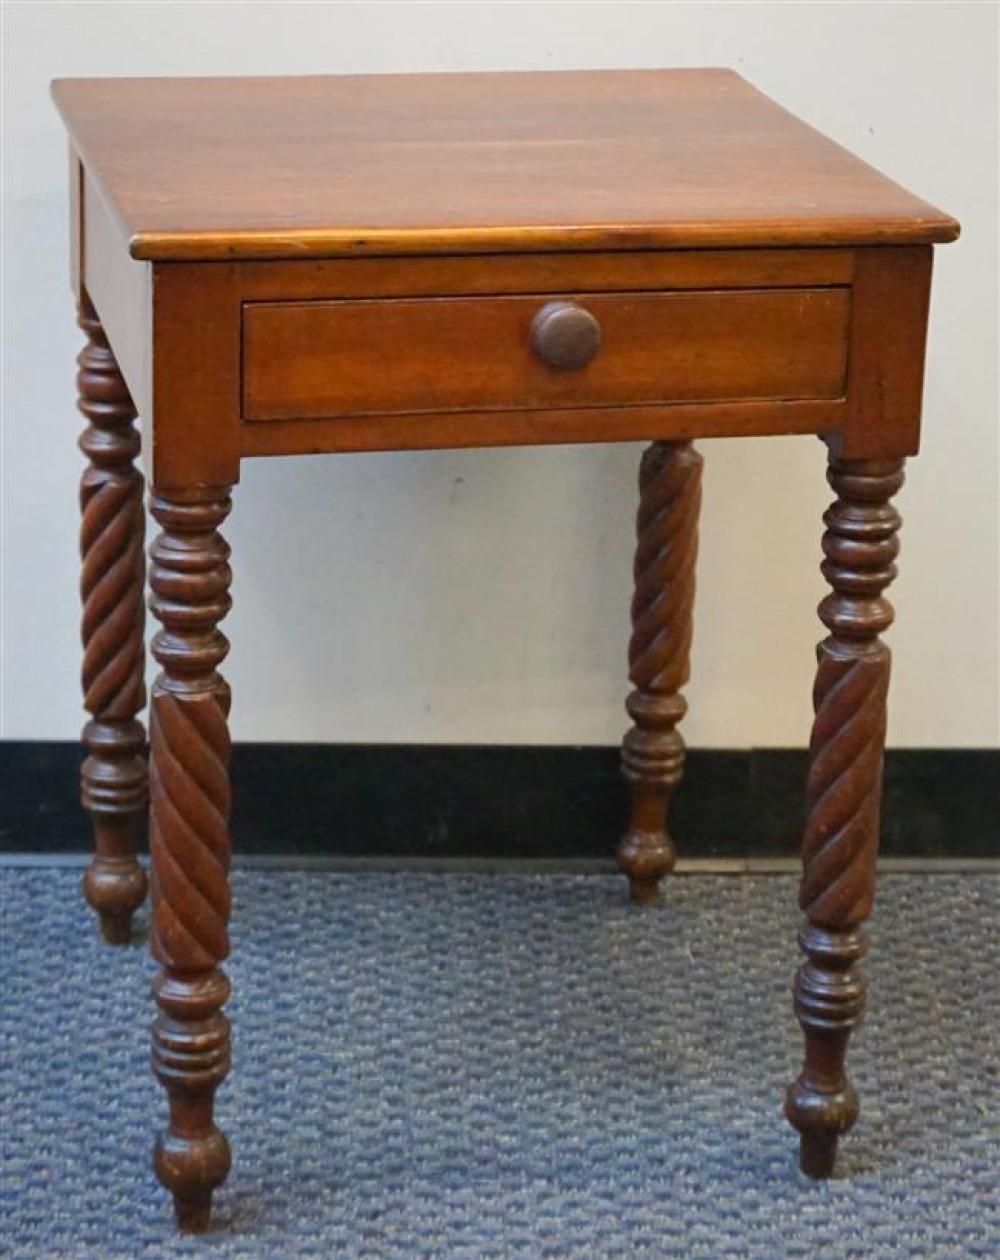 AMERICAN CHERRY WORK TABLE, 19TH